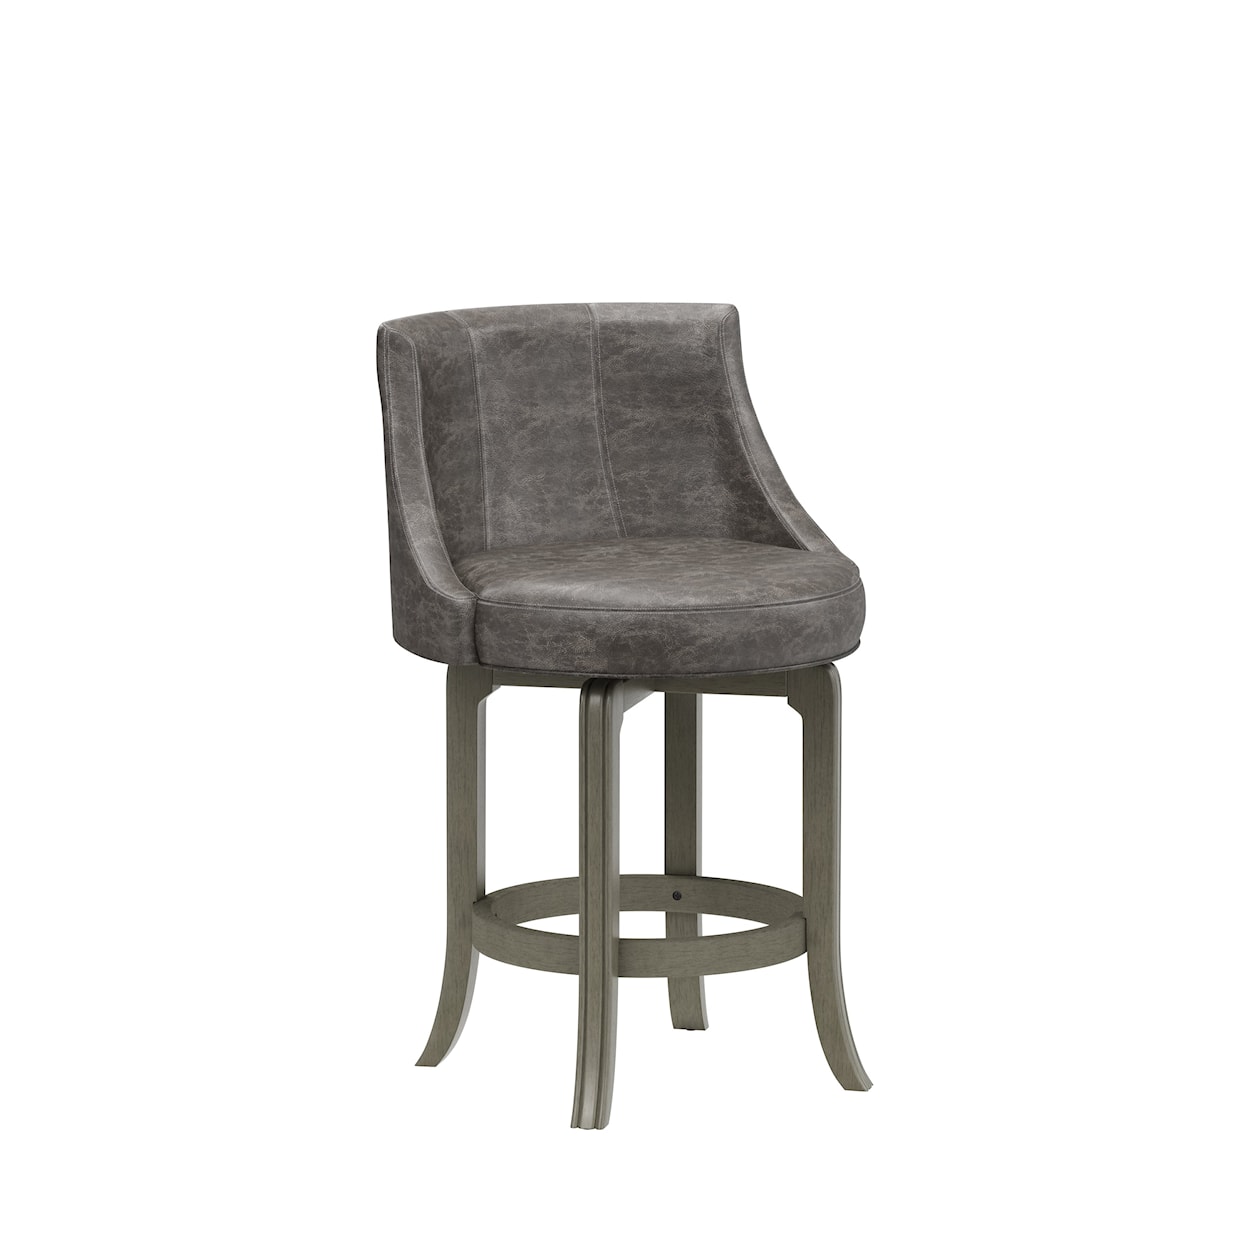 Hillsdale Napa Valley Counter Stool